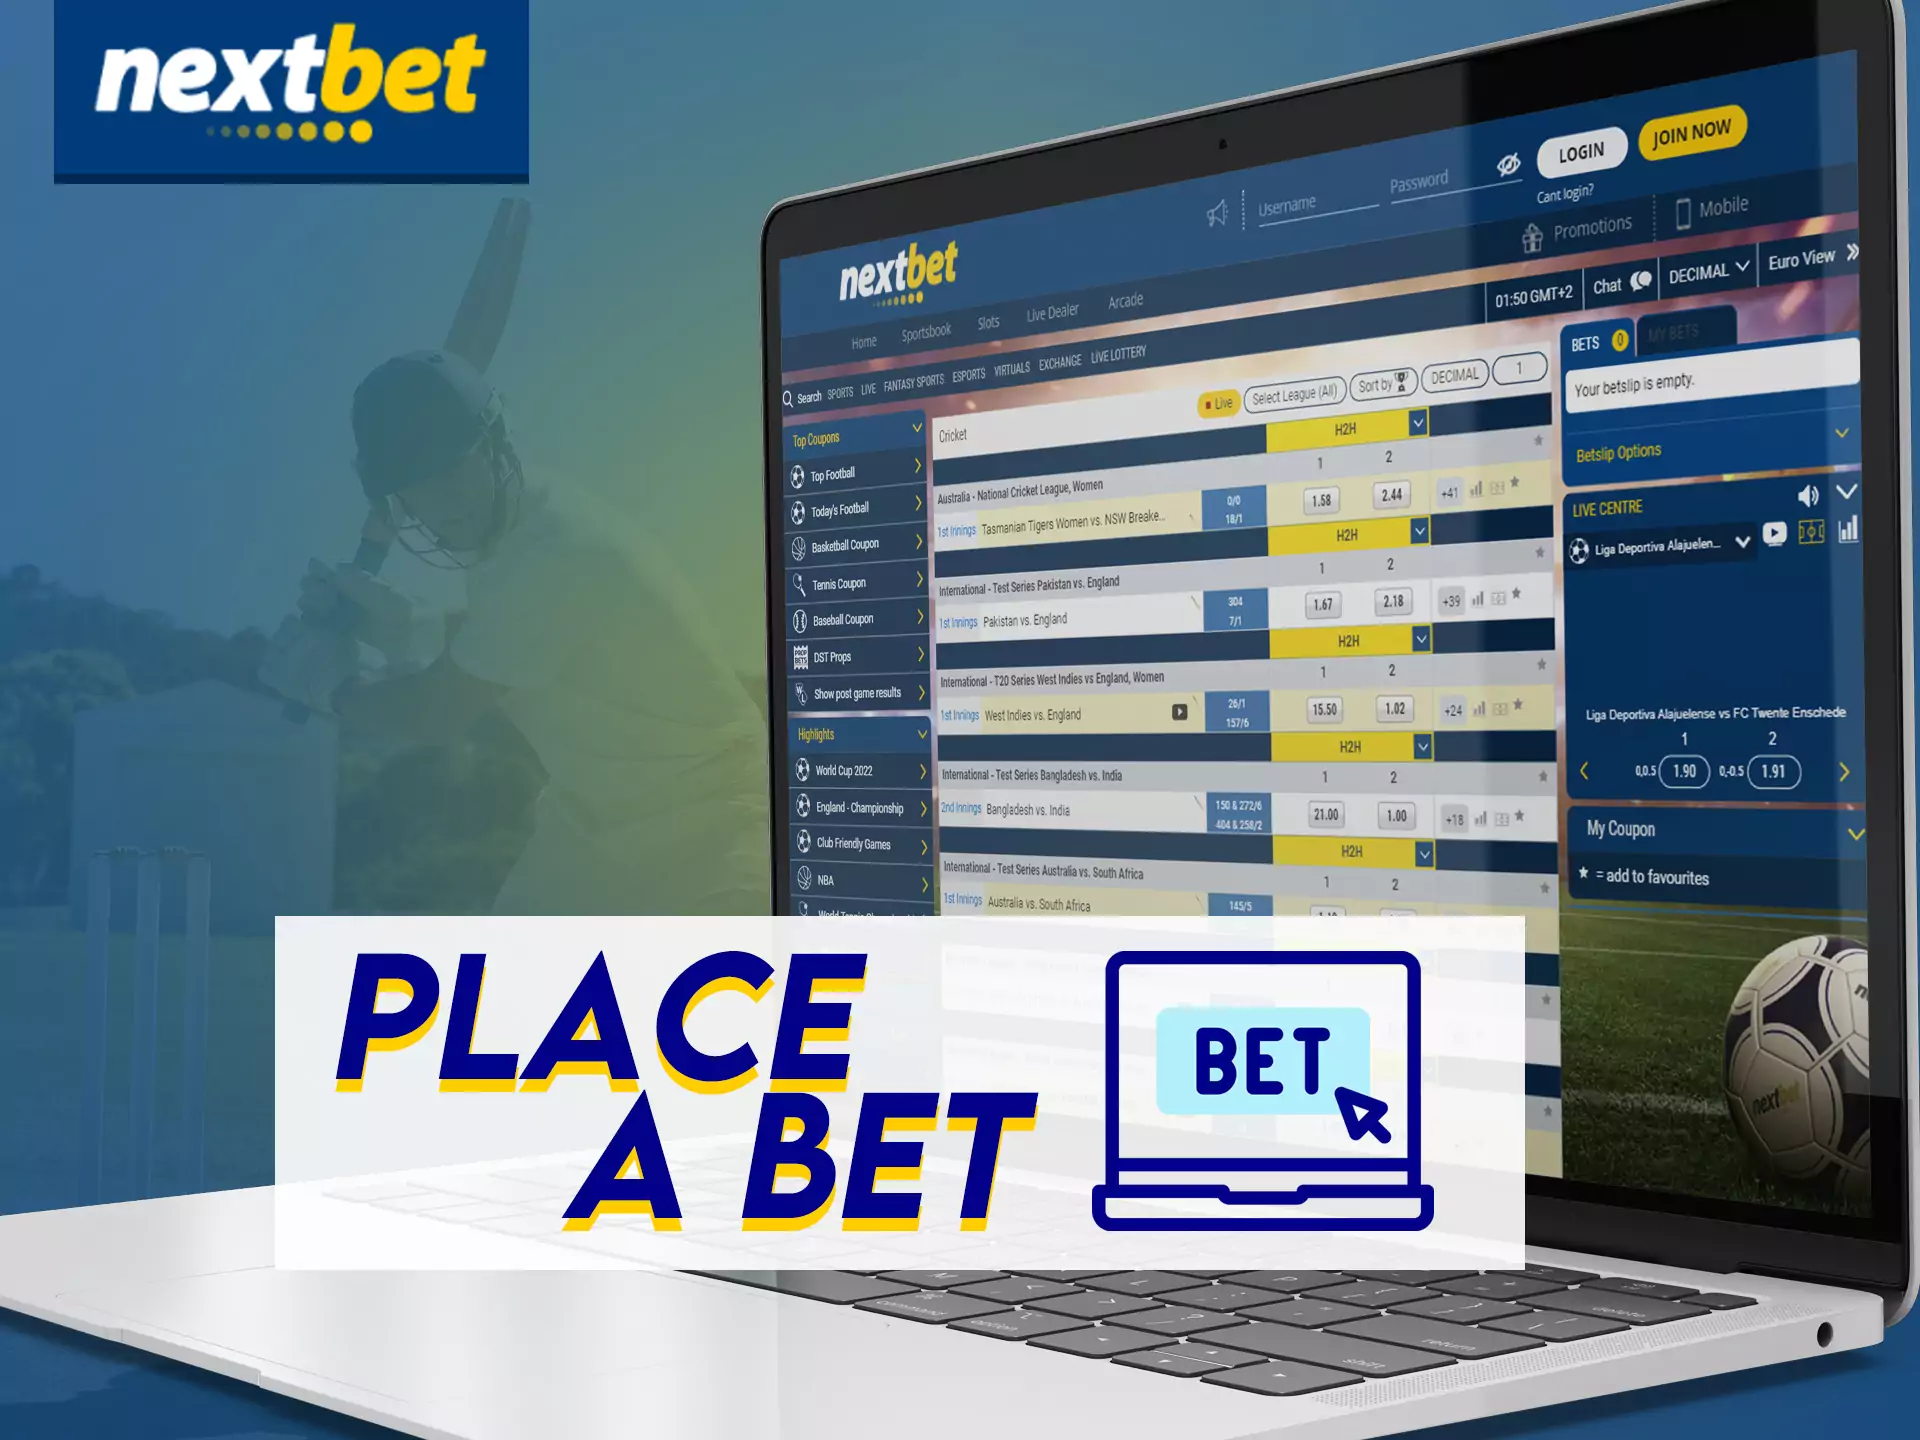 With this guide, learn how to easily place bets on Nextbet.